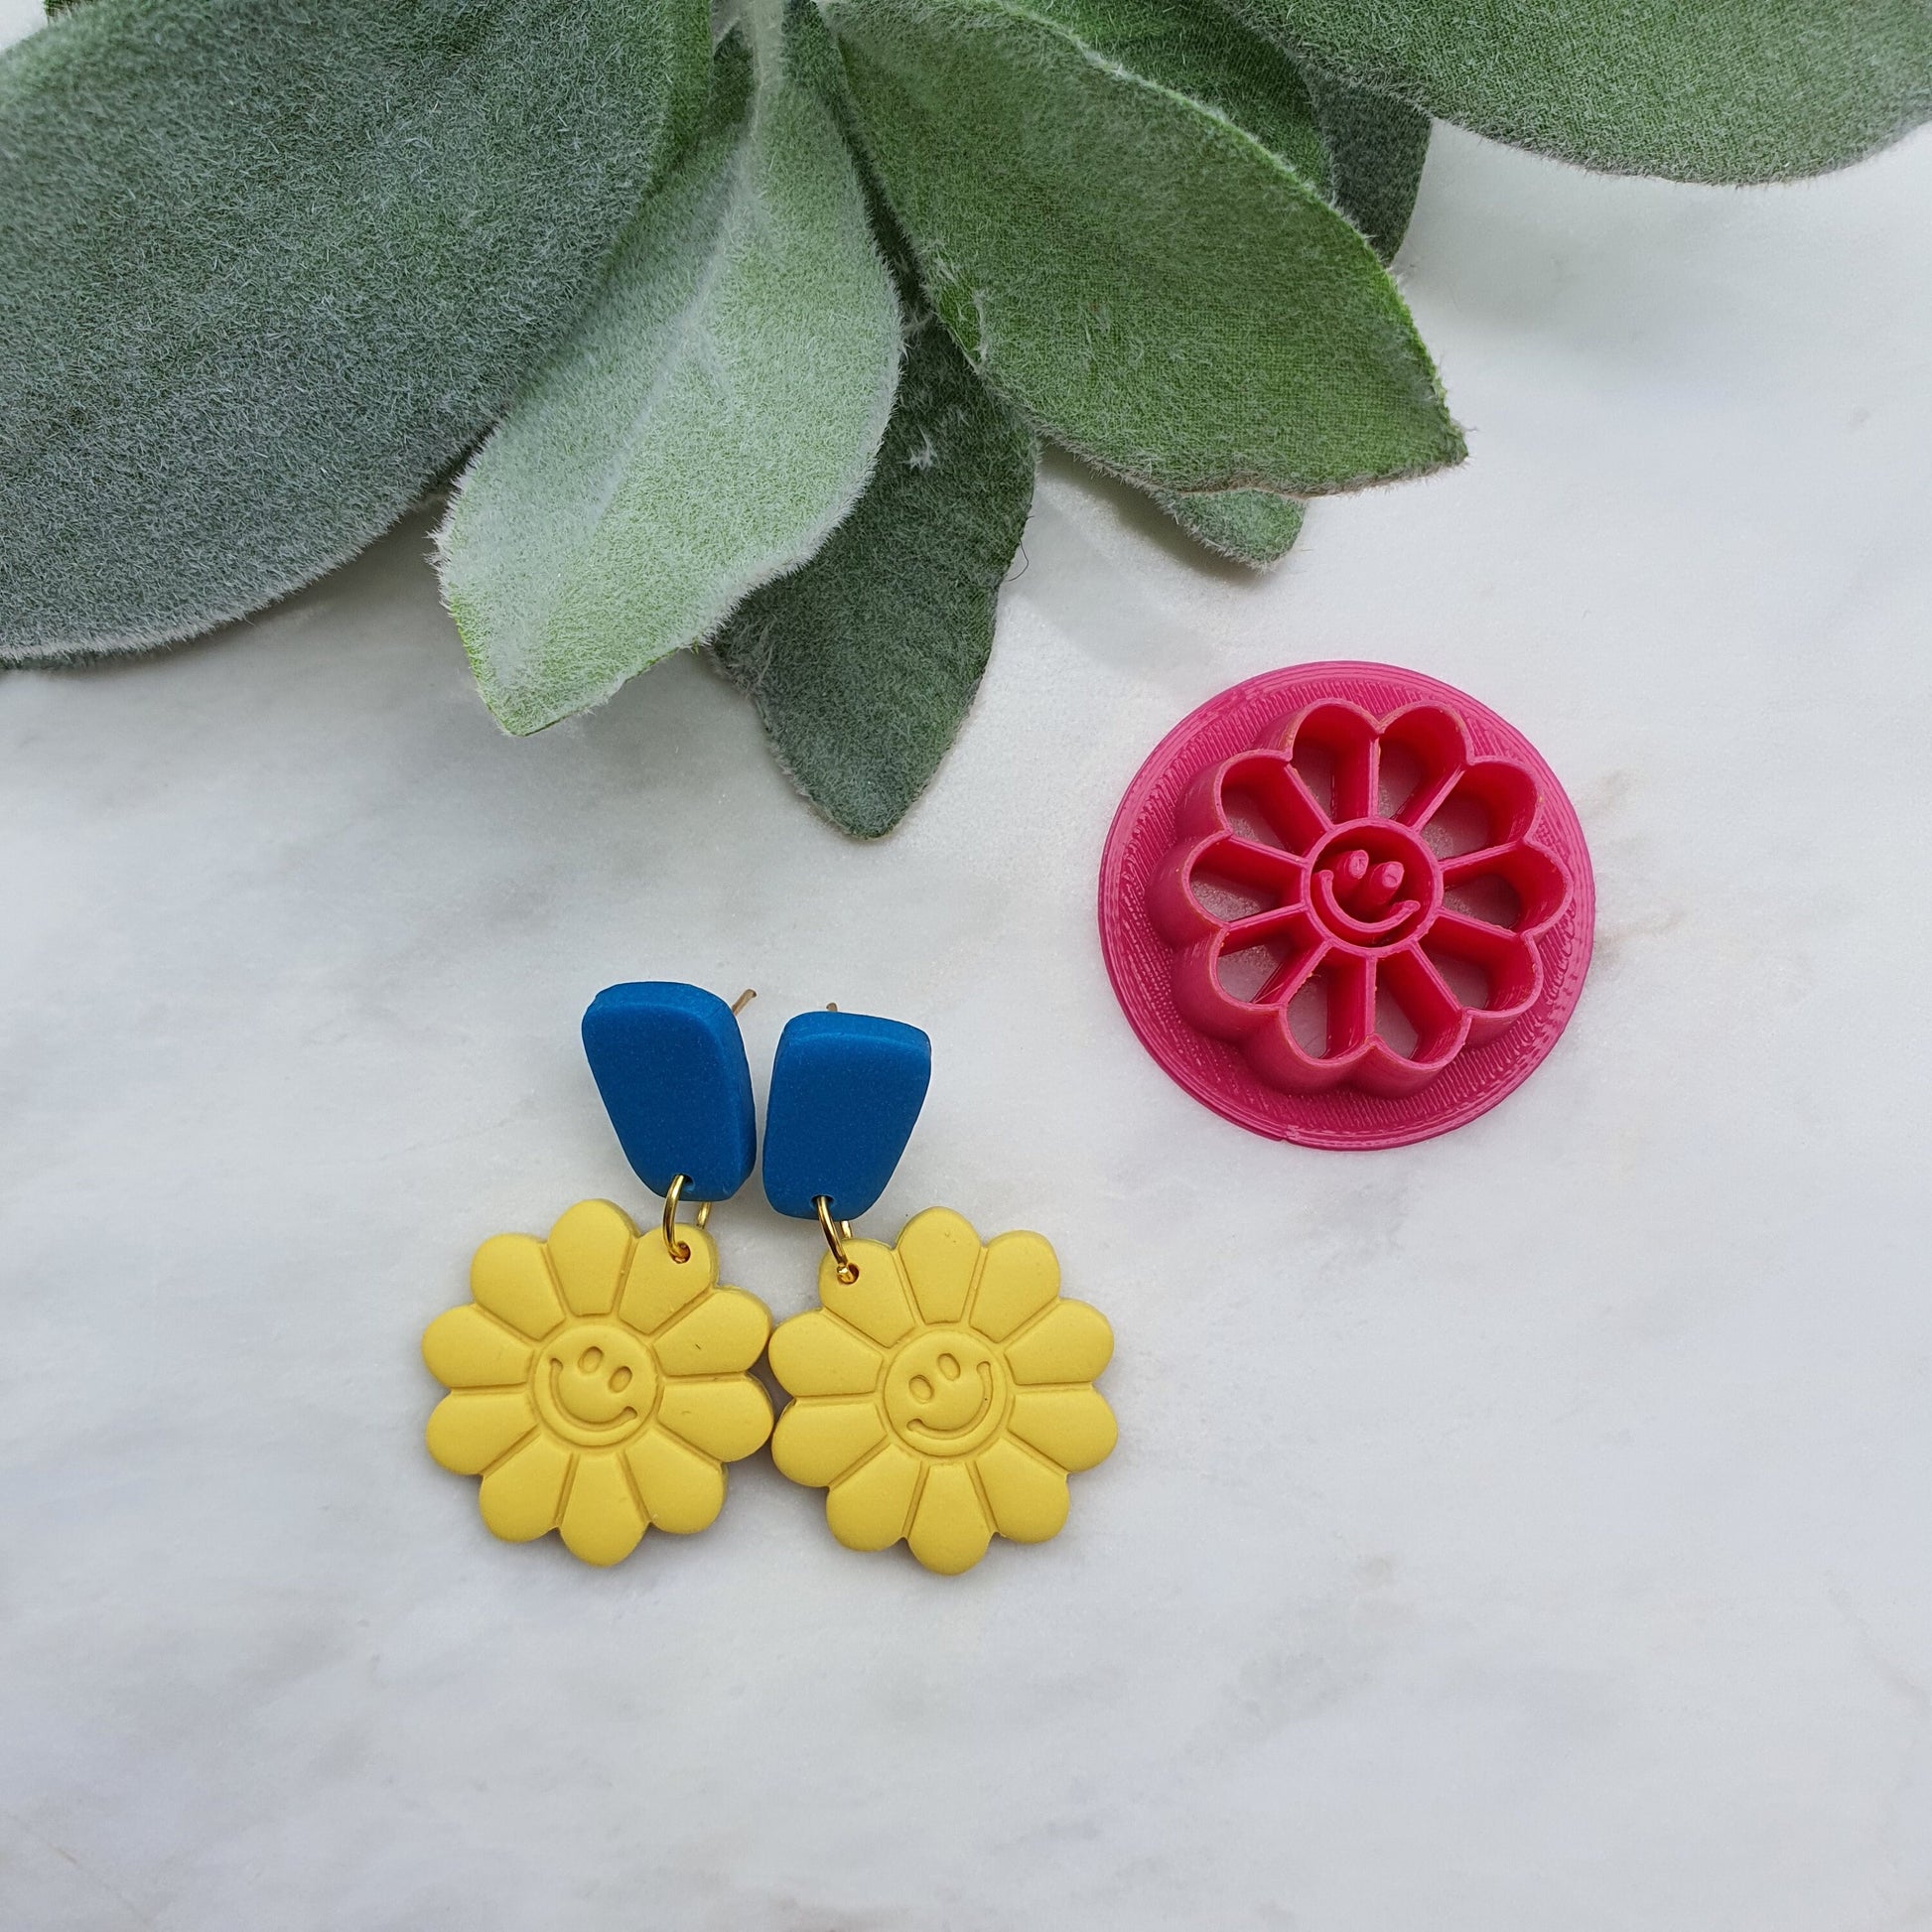 Earrings Polymer clay 3D cutters Jewelry mold "Smile flower"